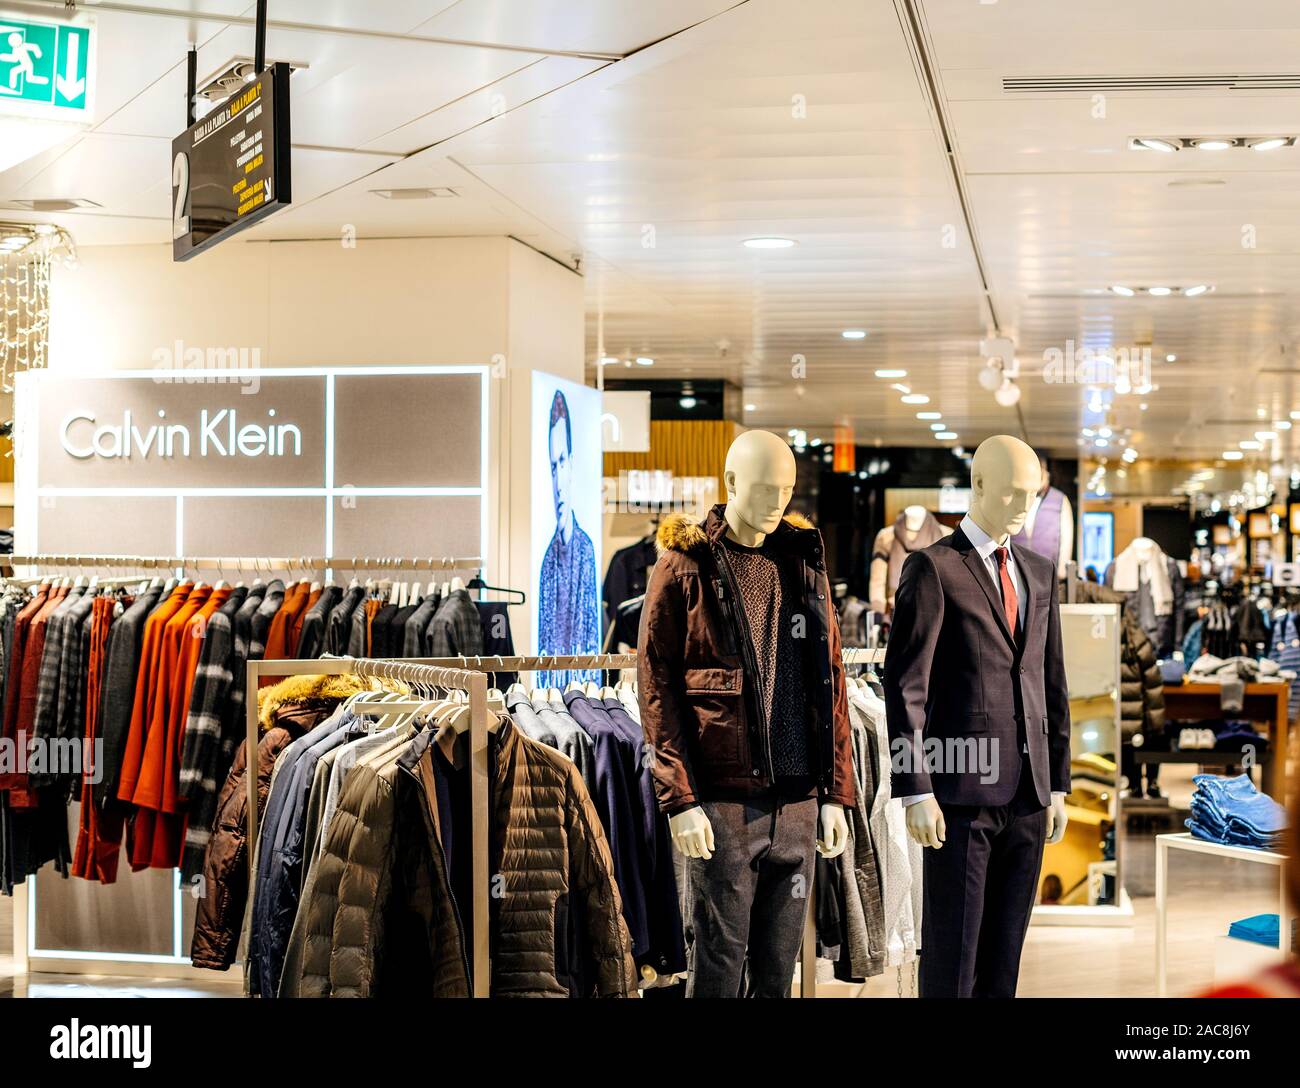 Barcelona, Spain - Nov 17, 2017: Front view of Two mannequins male  silhouettes wearing luxury silk jackets costumes in upscale fashion clothes  store Calvin Klein in El Corte Ingles Mall Stock Photo - Alamy